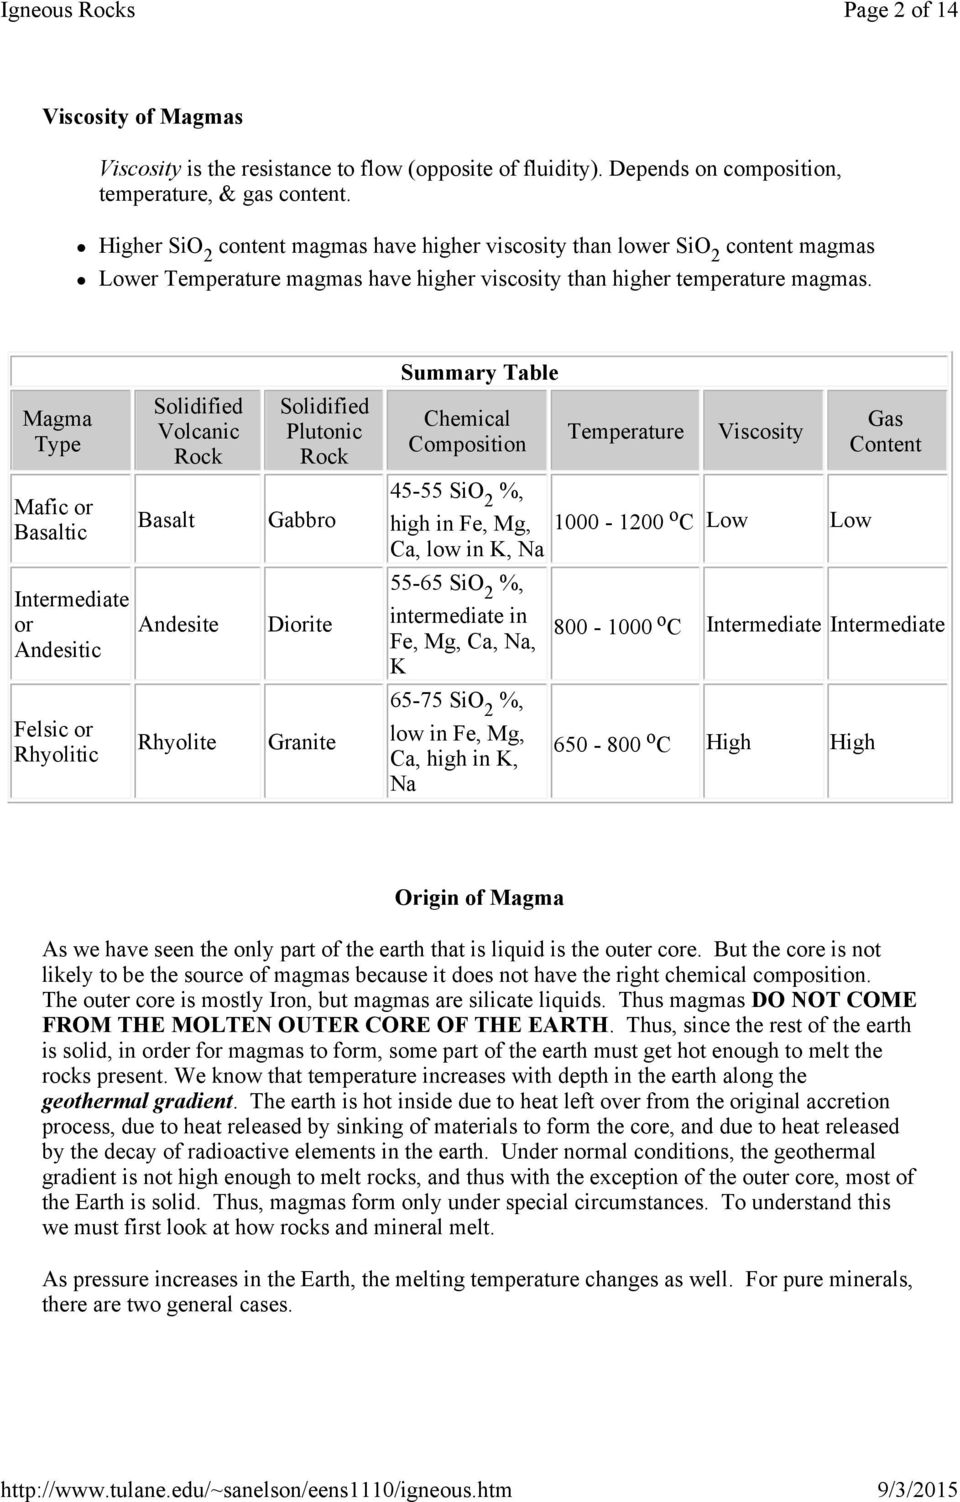 Summary Table Magma Type Solidified Volcanic Rock Solidified Plutonic Rock Chemical Composition Temperature Viscosity Gas Content Mafic or Basaltic Basalt Gabbro 45-55 SiO 2 %, high in Fe, Mg,